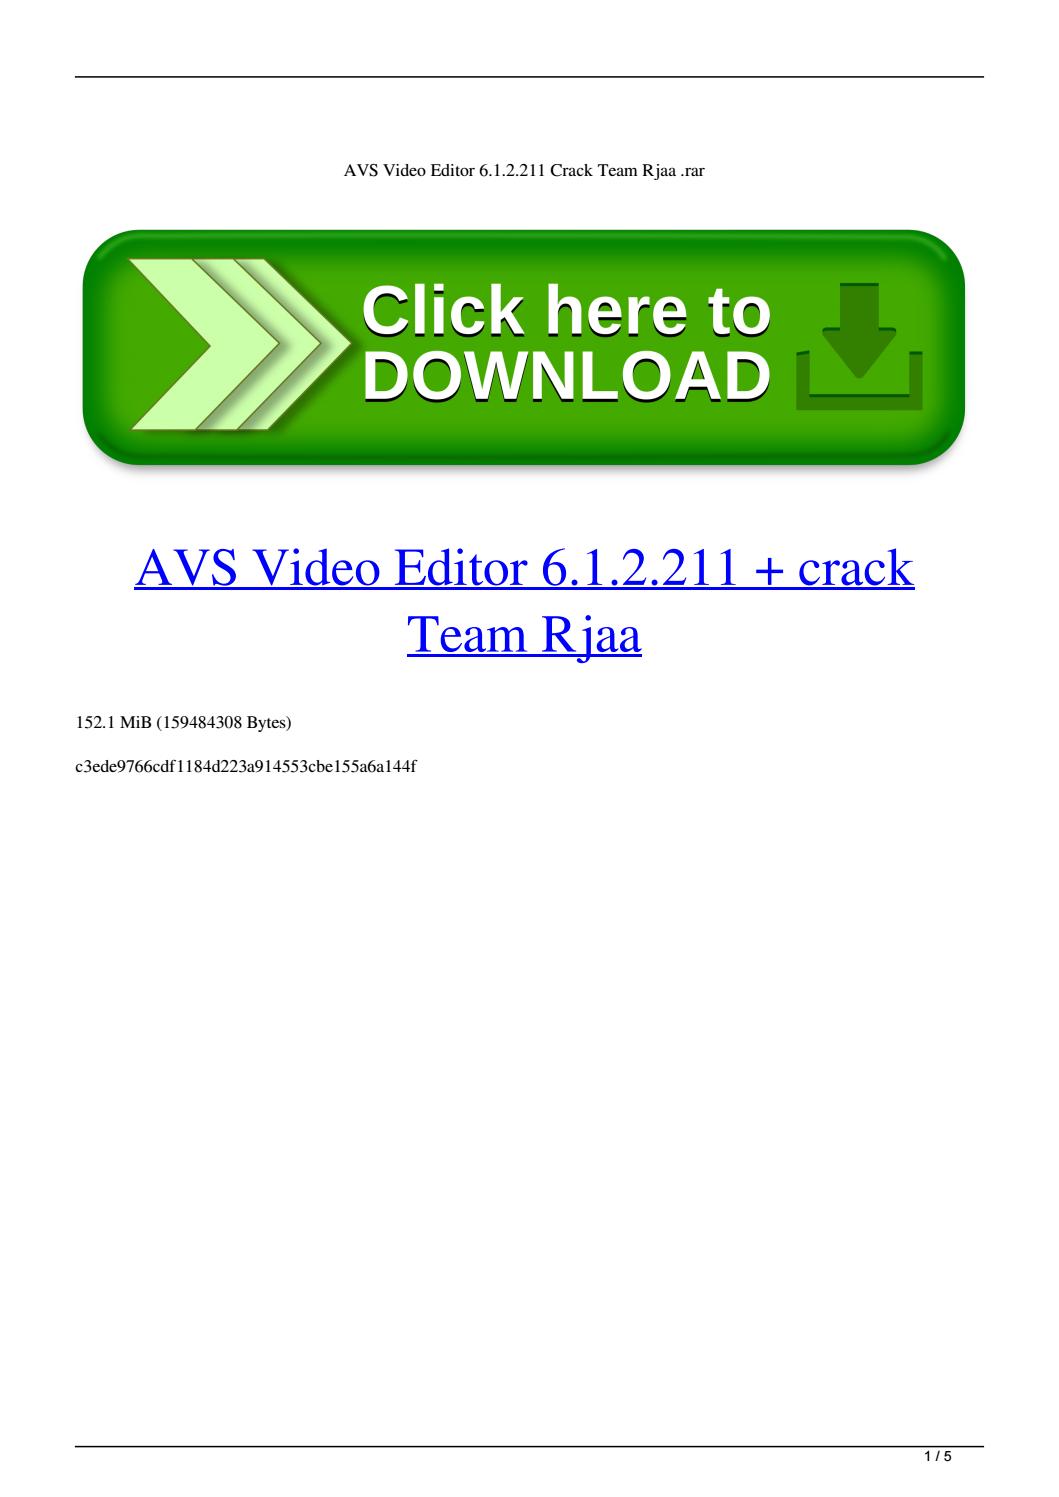 avs video editor activation key free download